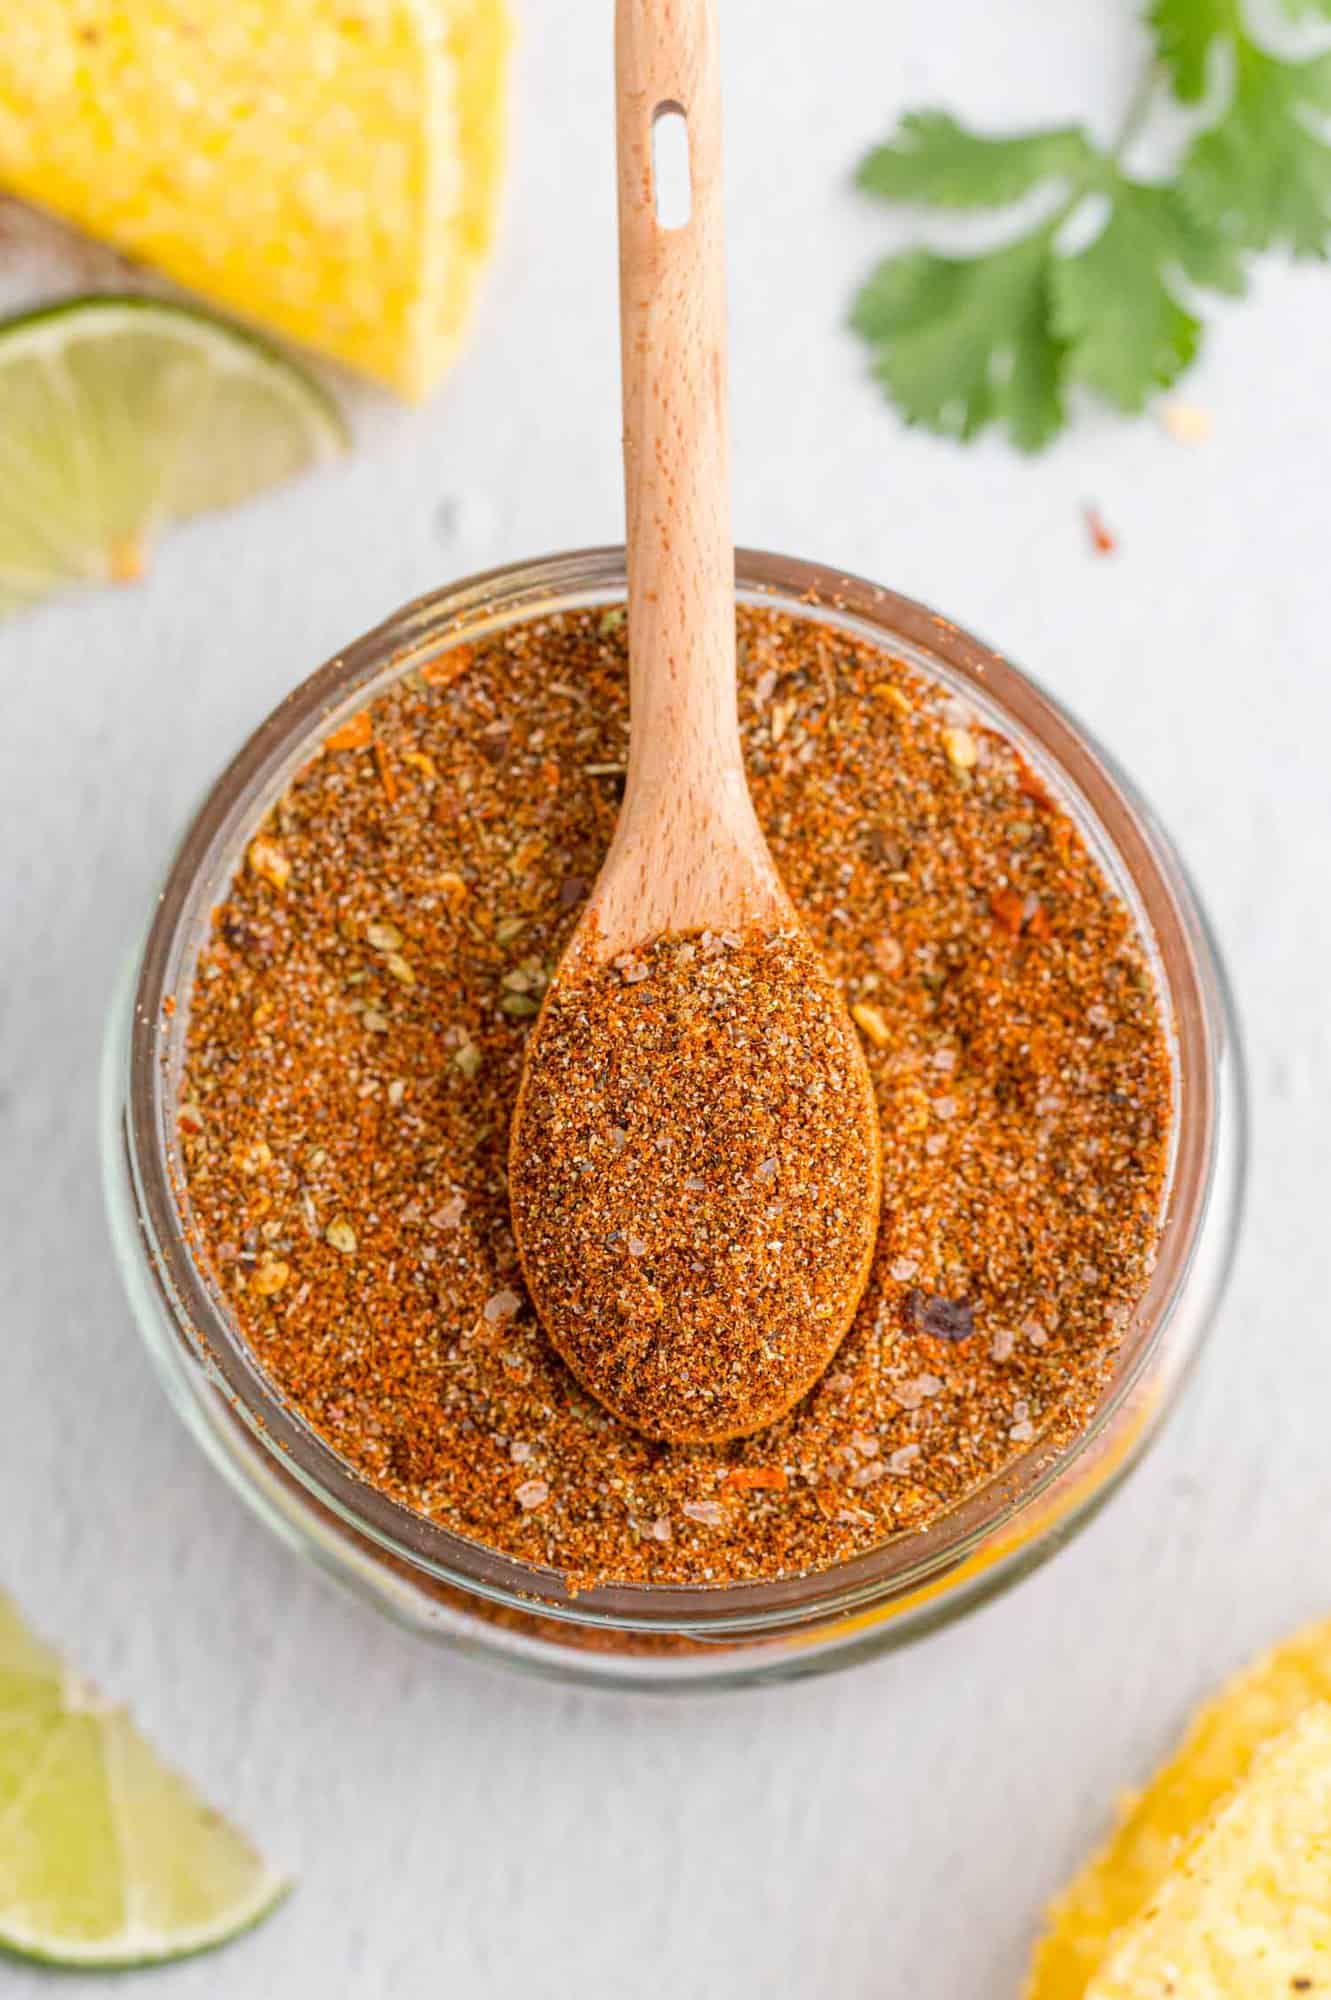 Overhead view of seasoning for tacos in a small glass jar with a wooden spoon.